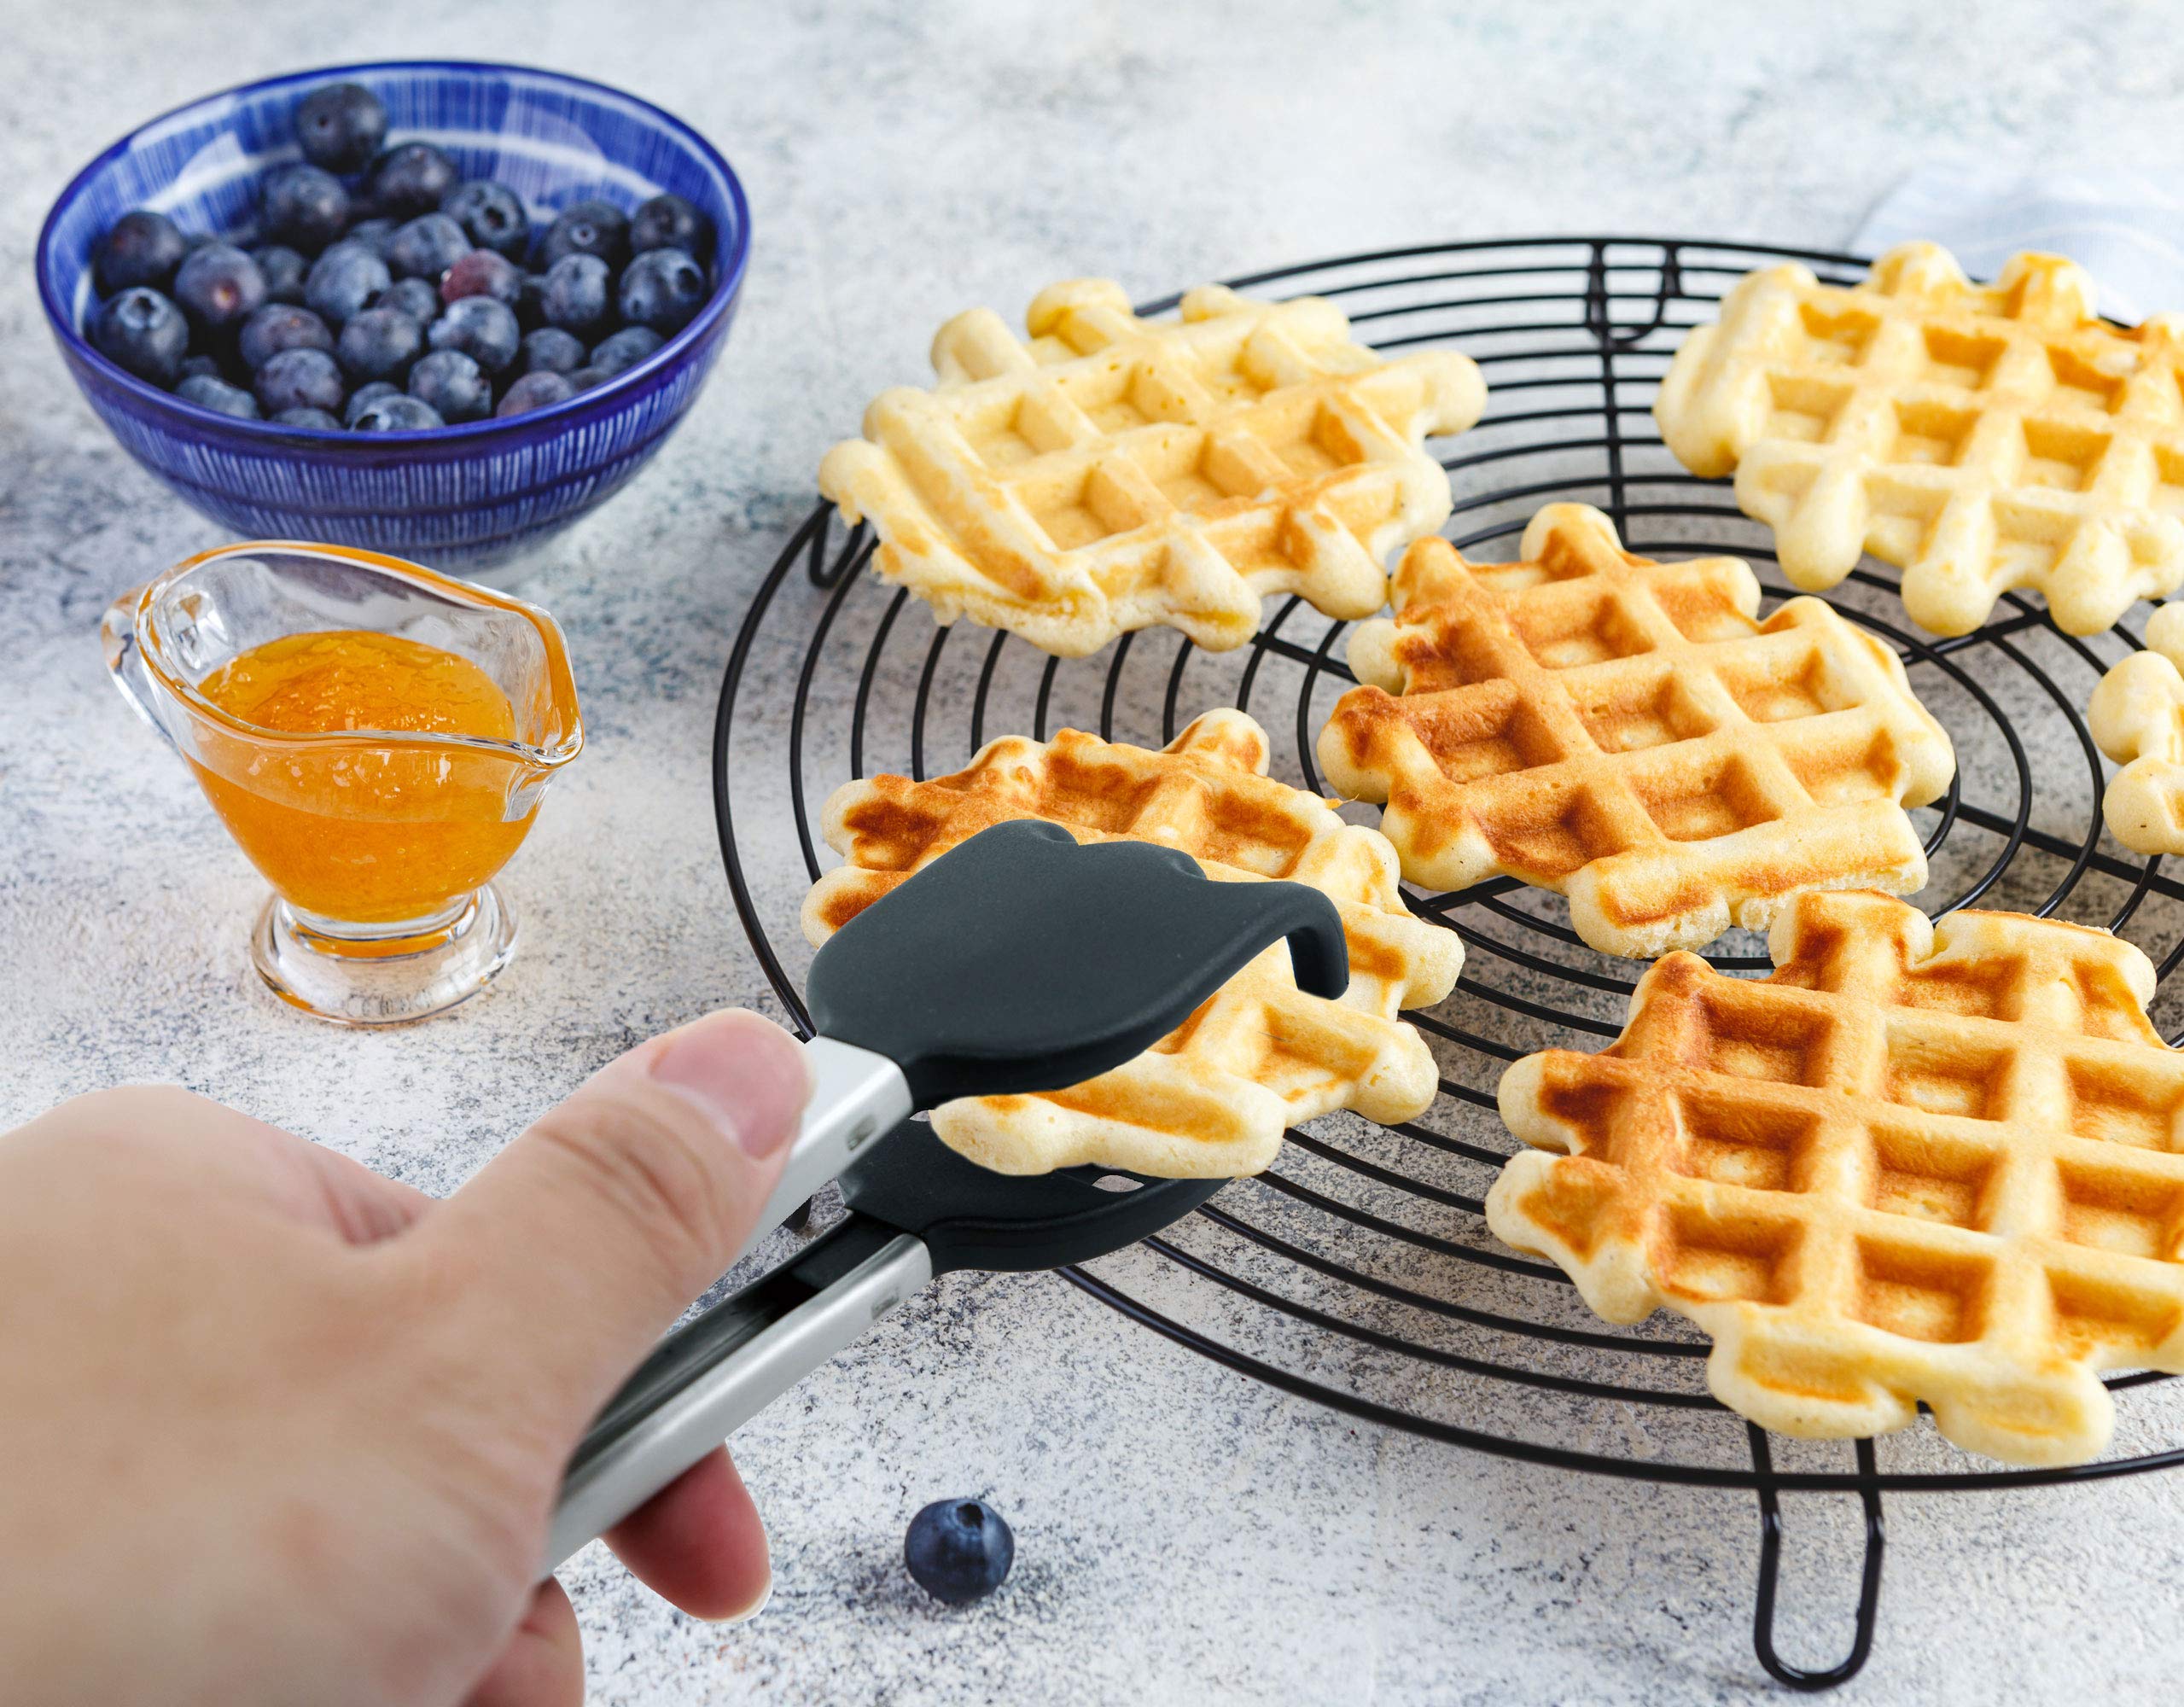 Mini Waffle Tongs by StarBlue – 8 Inches Silicone and Nylon Serving Tongs with Non-Slip Smooth Handles, Non-Scratch and Dishwasher Safe, Multipurpose Spatula Tongs for Belgian Waffle Serving